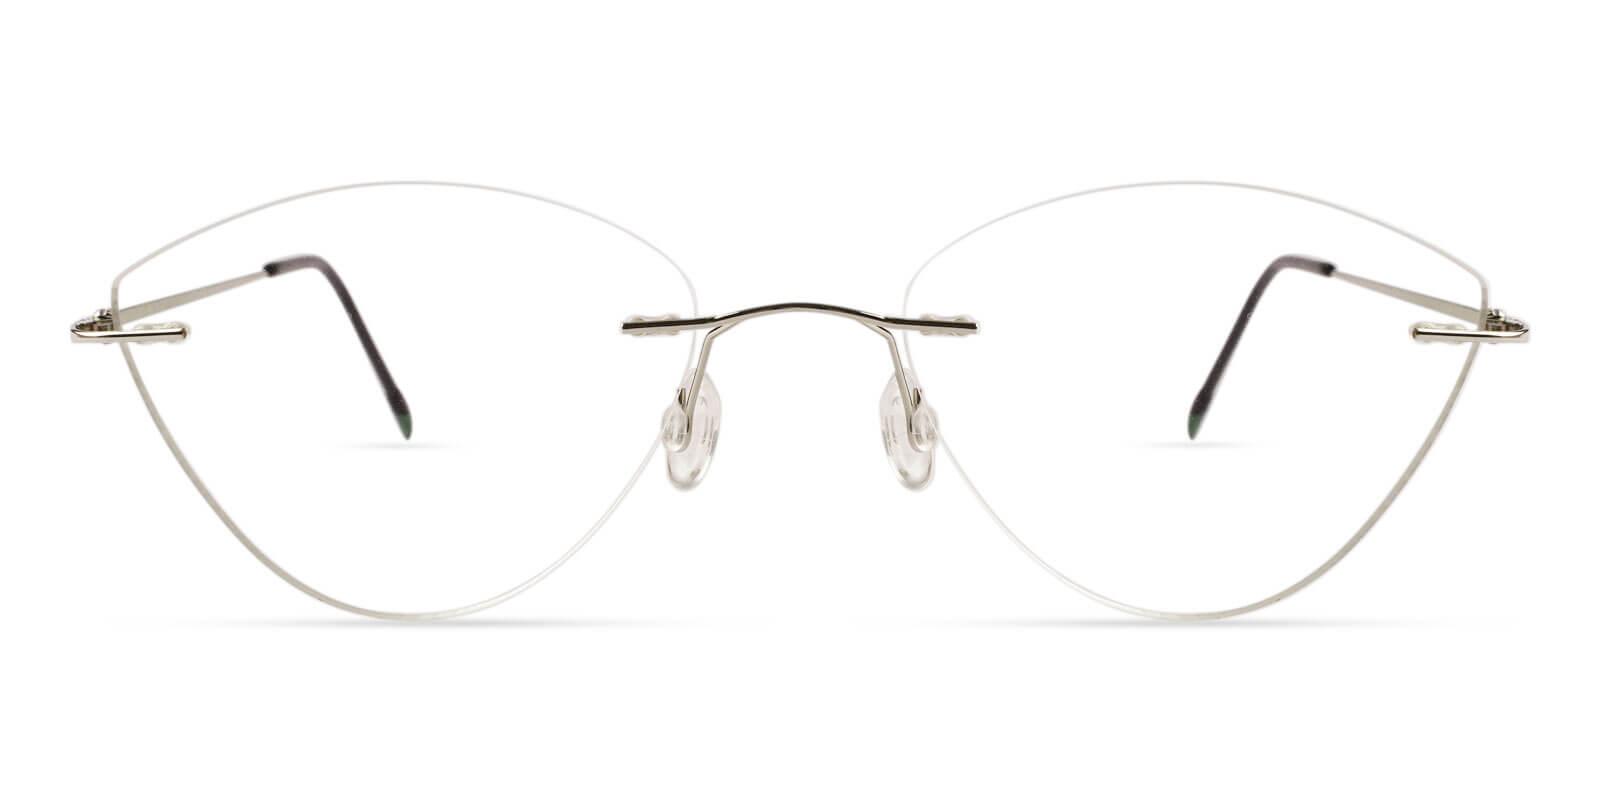 Congo Silver Metal Eyeglasses , NosePads Frames from ABBE Glasses